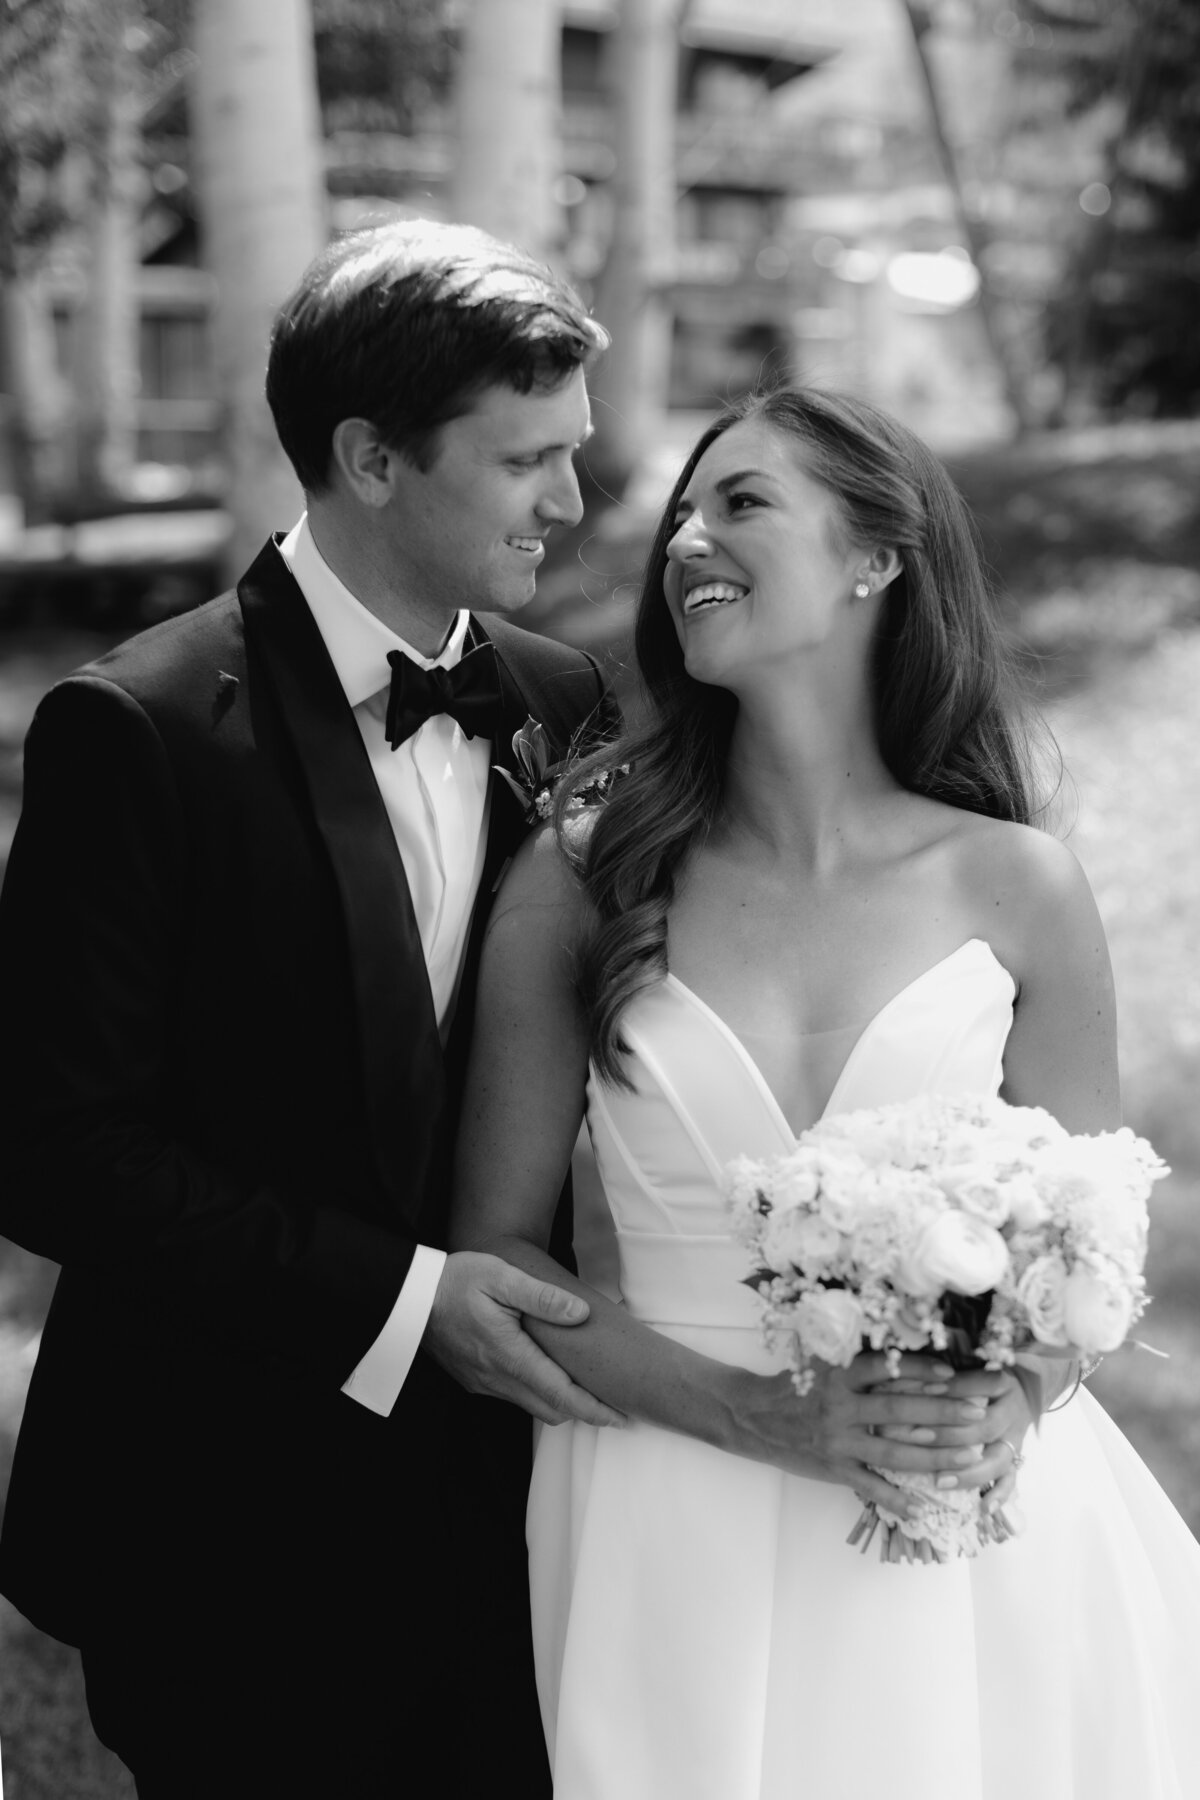 Spencer and Chris at Aspen in St. Regis By Kelby Maria Photography-0226